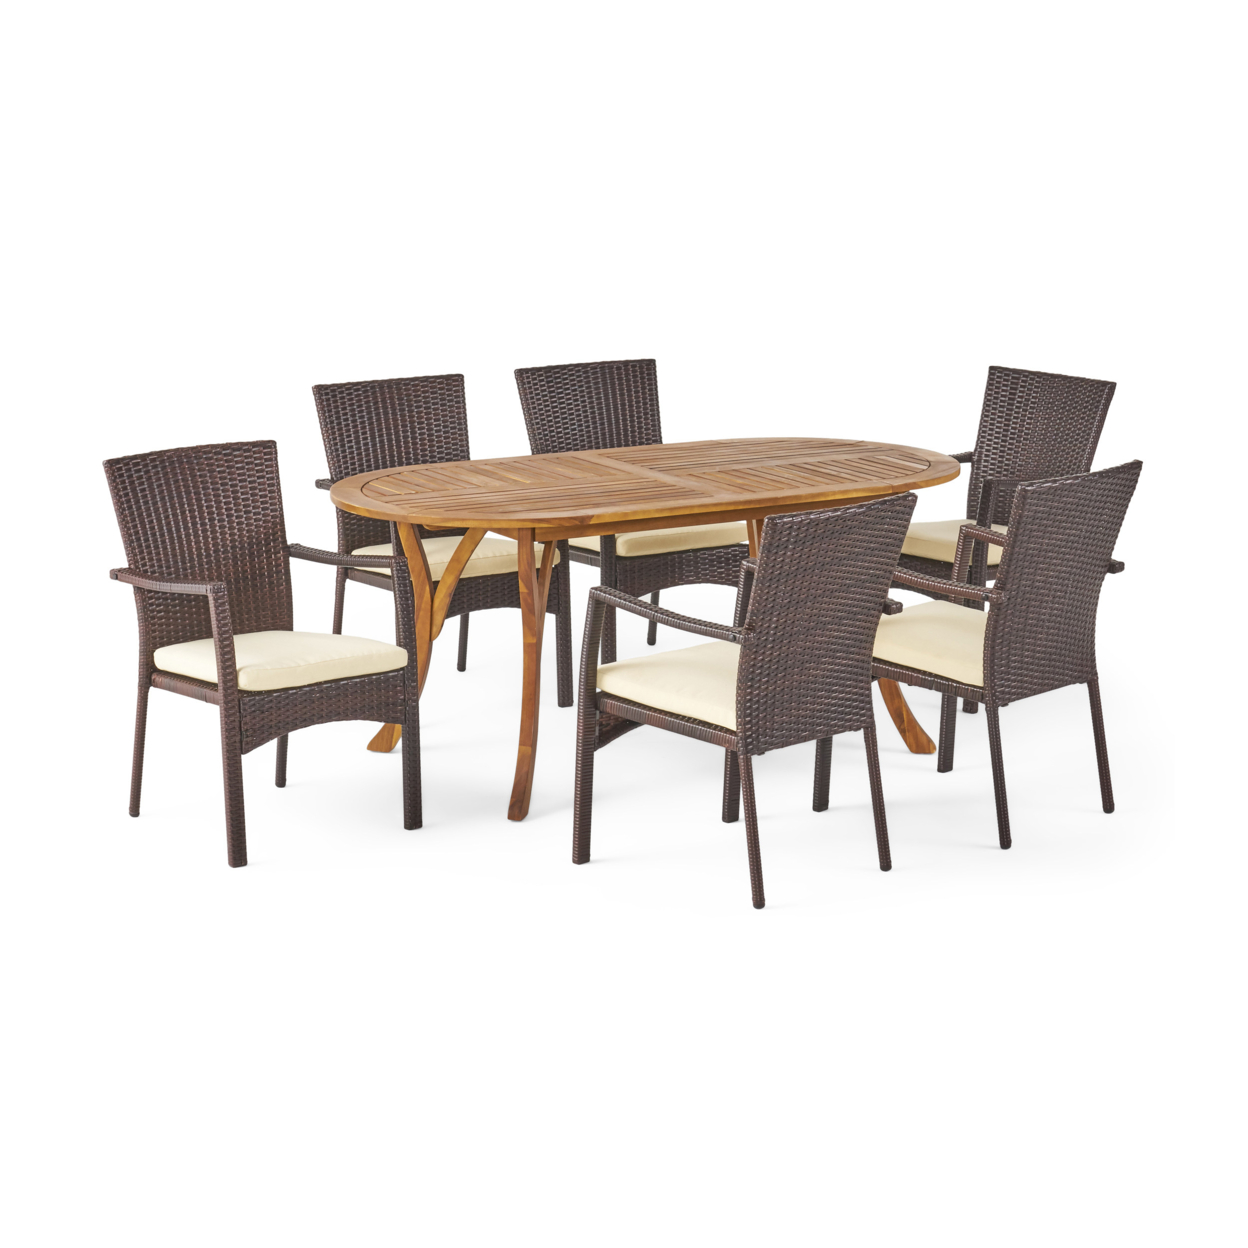 Polk Outdoor 7 Piece Acacia Wood And Wicker Dining Set, Teak With Brown Chairs